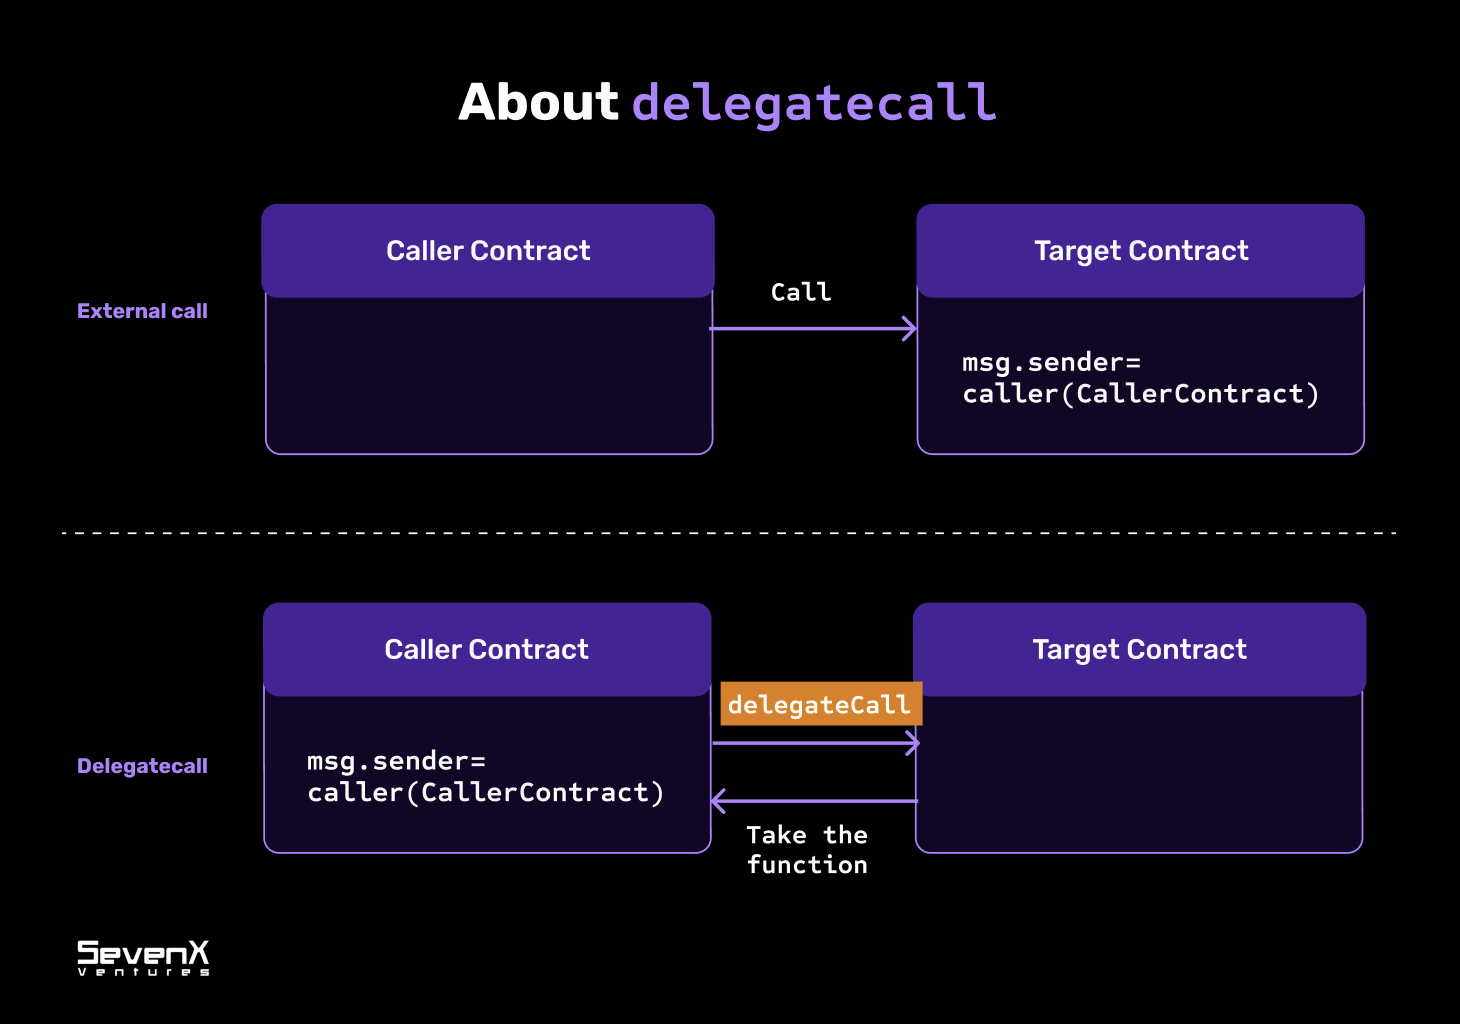 About delegateCall